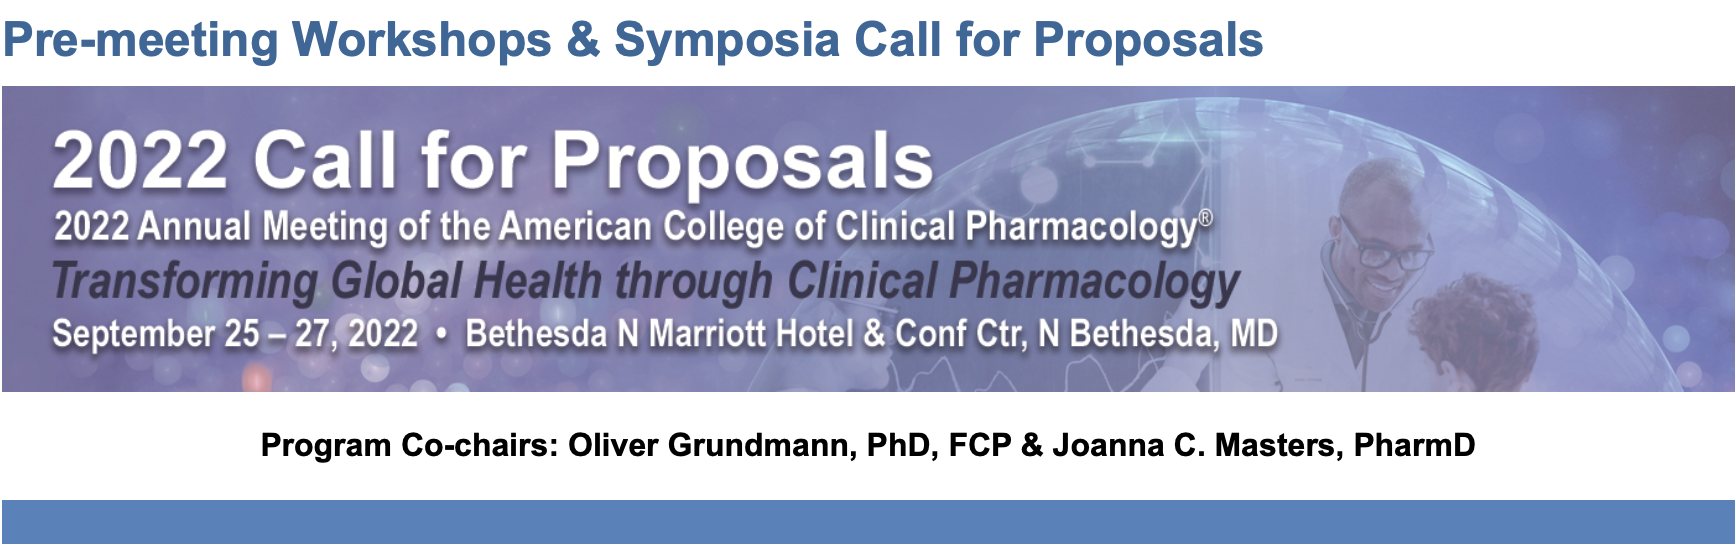 ACCP 2022 Call for Proposals